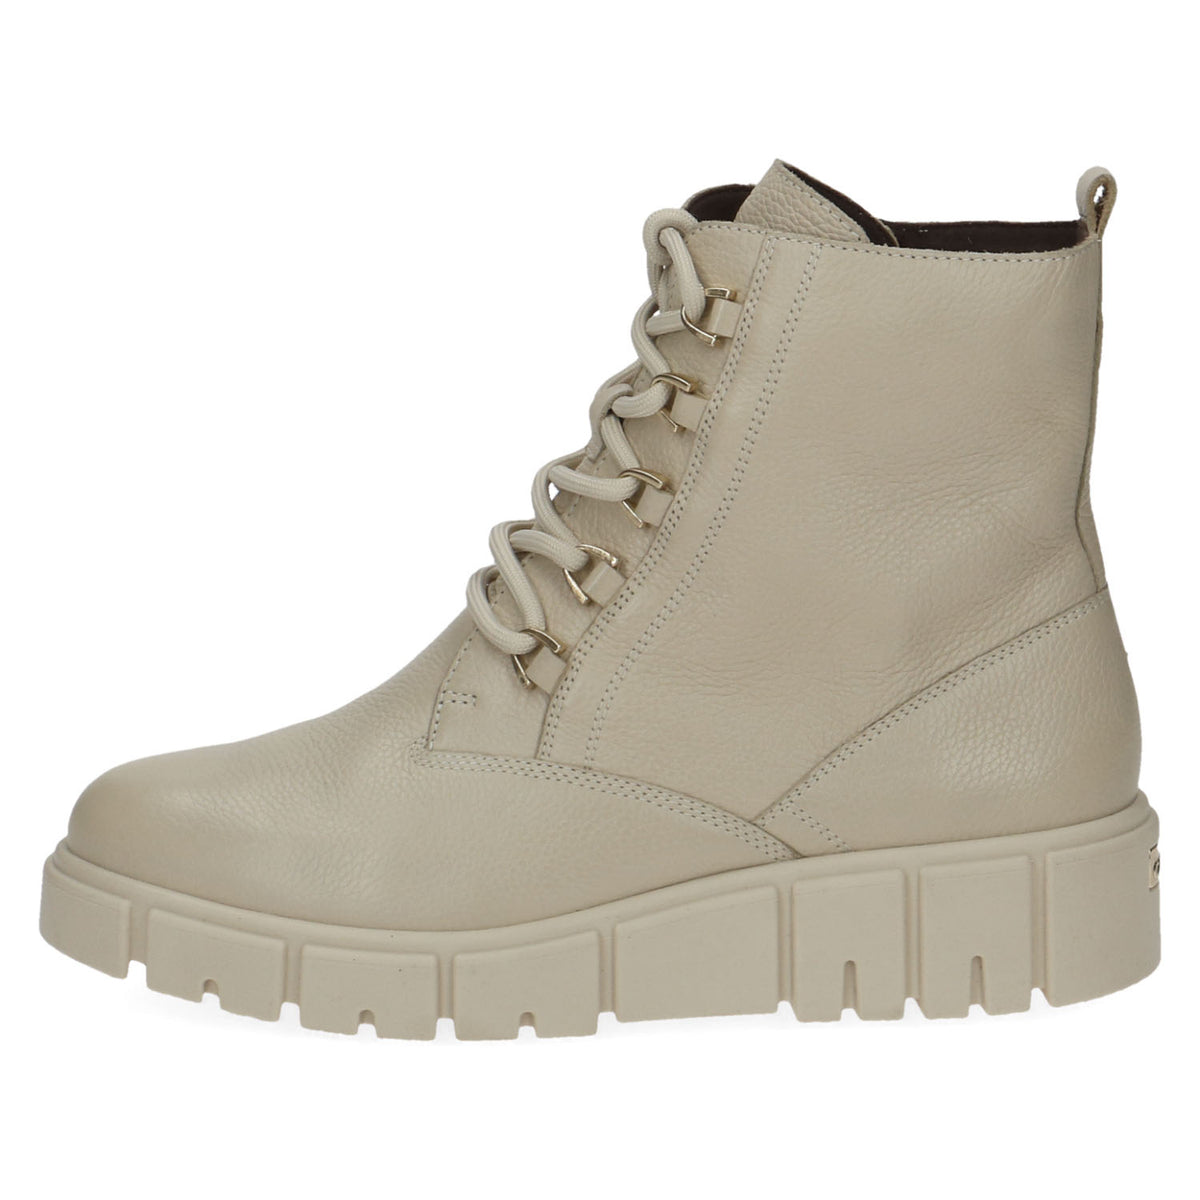 Front view of the cream leather ankle boot.